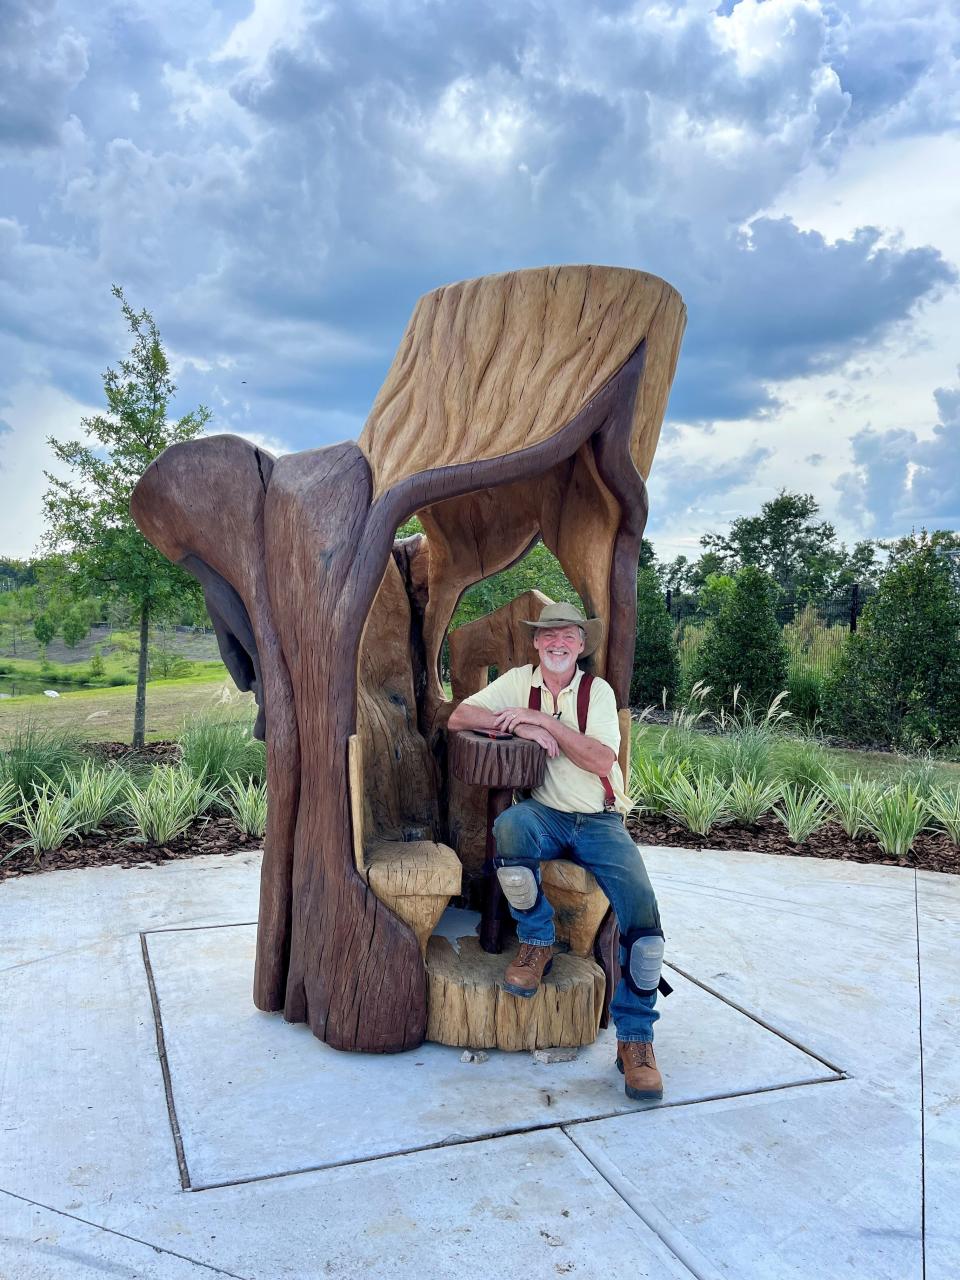 John Birch created three wood sculptures “Community,” “Your Move,” and “Metamorphosis” installed in October 2023 at the new community gathering space at 3DB Stormwater Facility as part of Blueprint's History and Culture Trail.